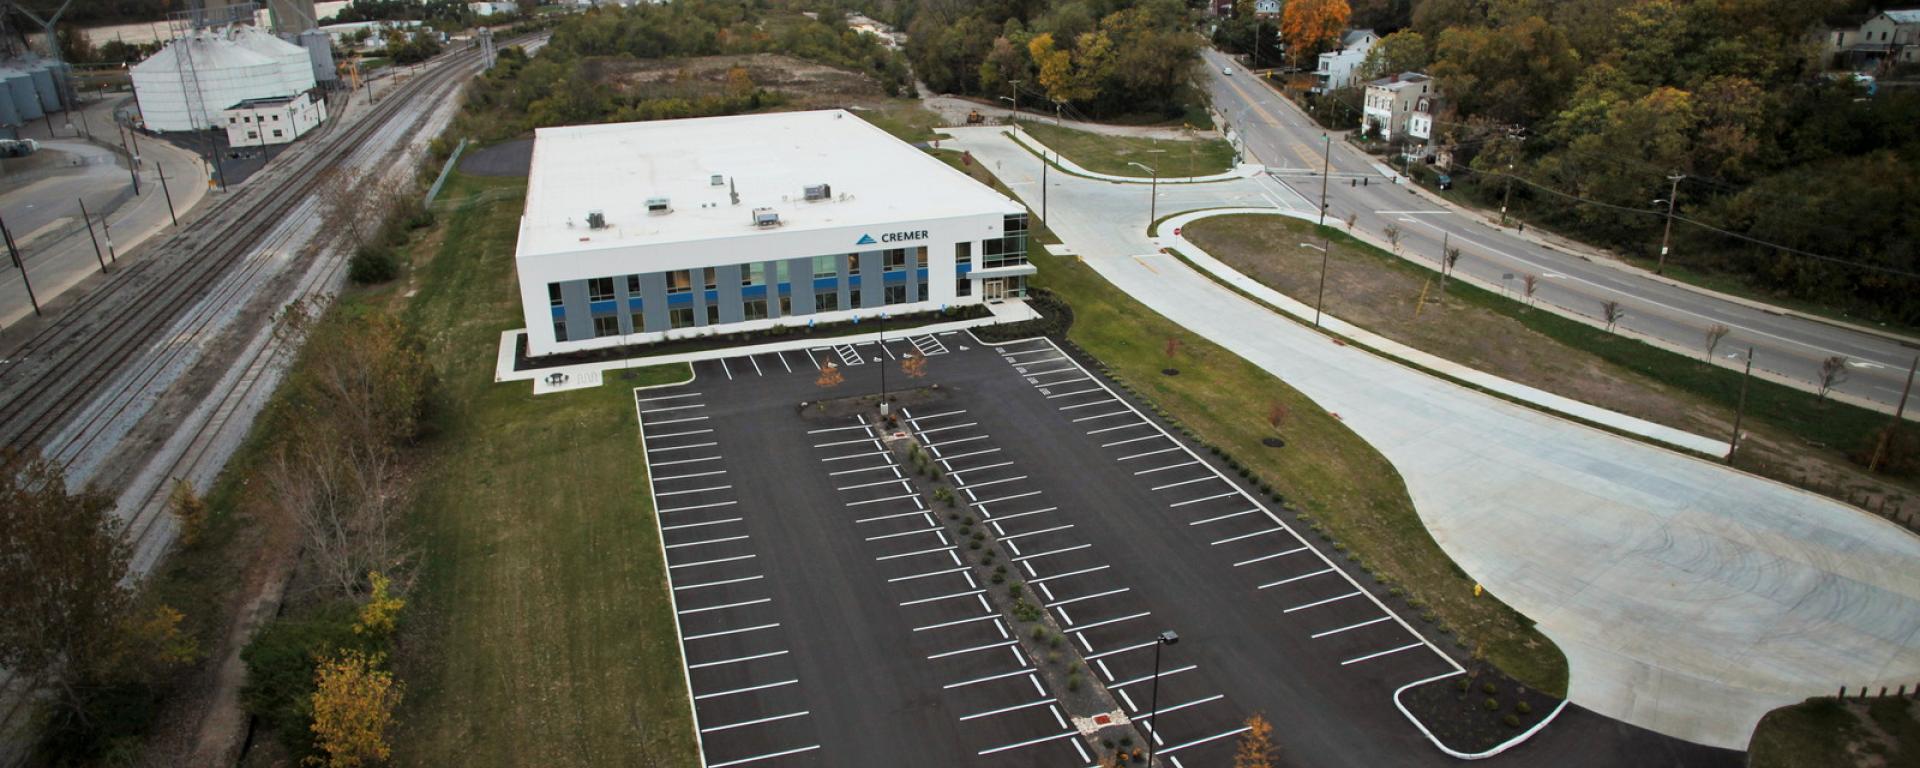 aerial of front profile and parking lot and entry drive